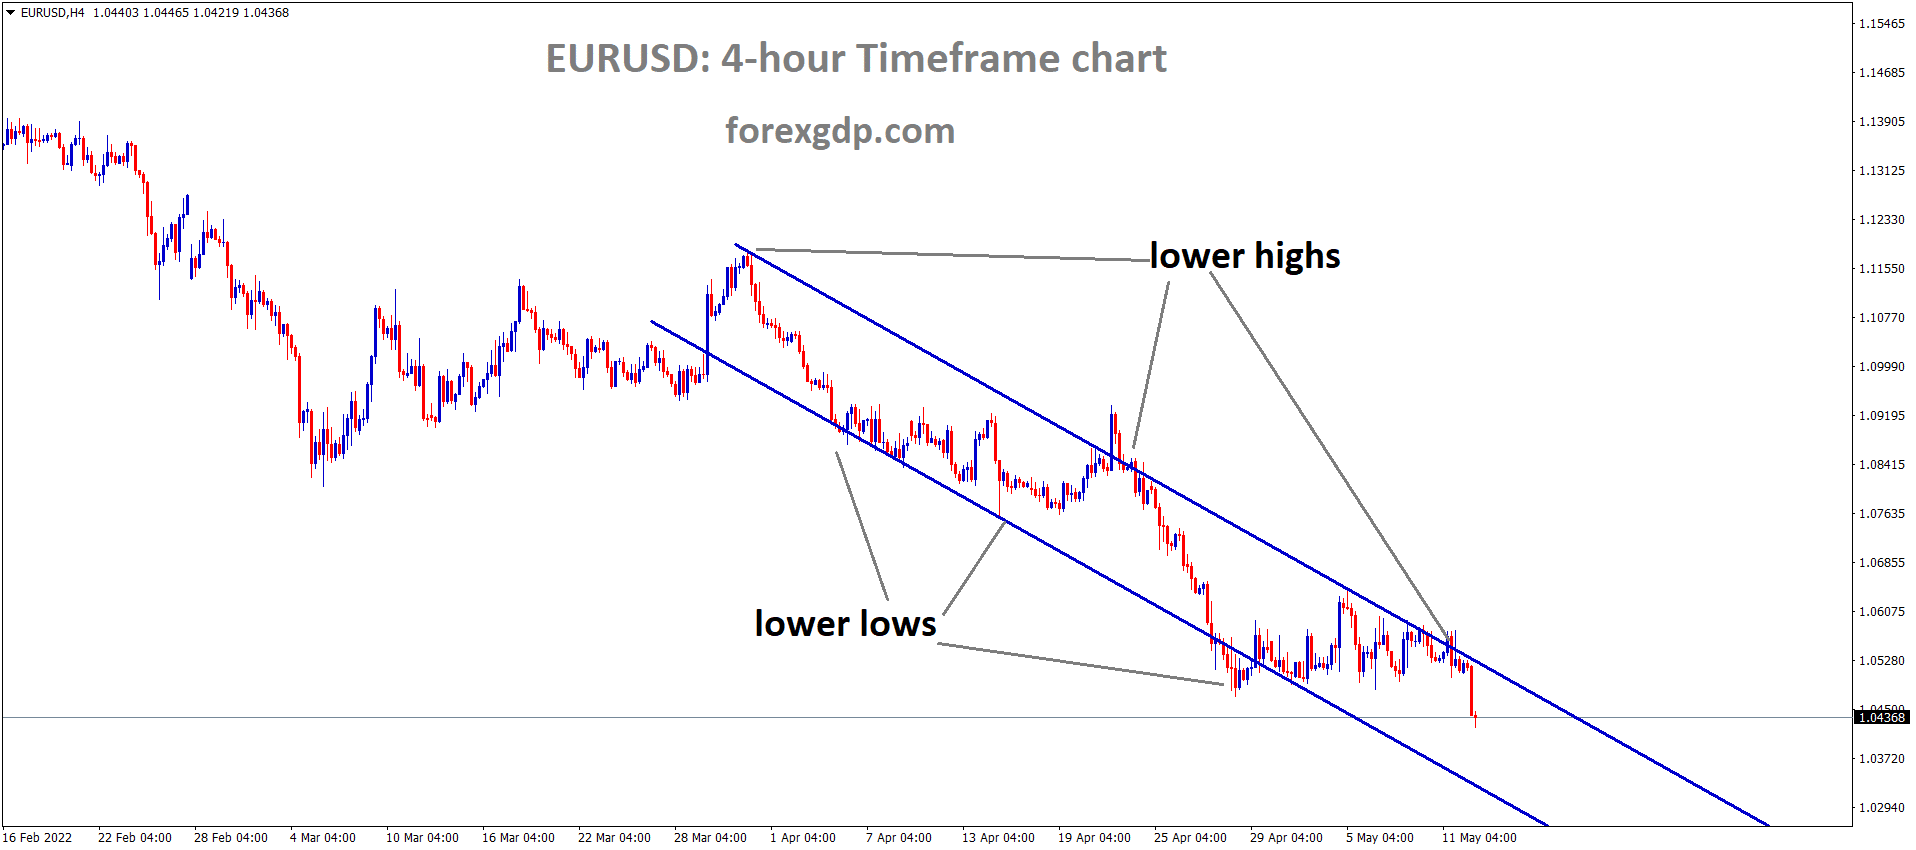 EURUSD H4 Time Frame Analysis Market is moving in the Descending channel and the market has fallen from the lower high area of the Channel